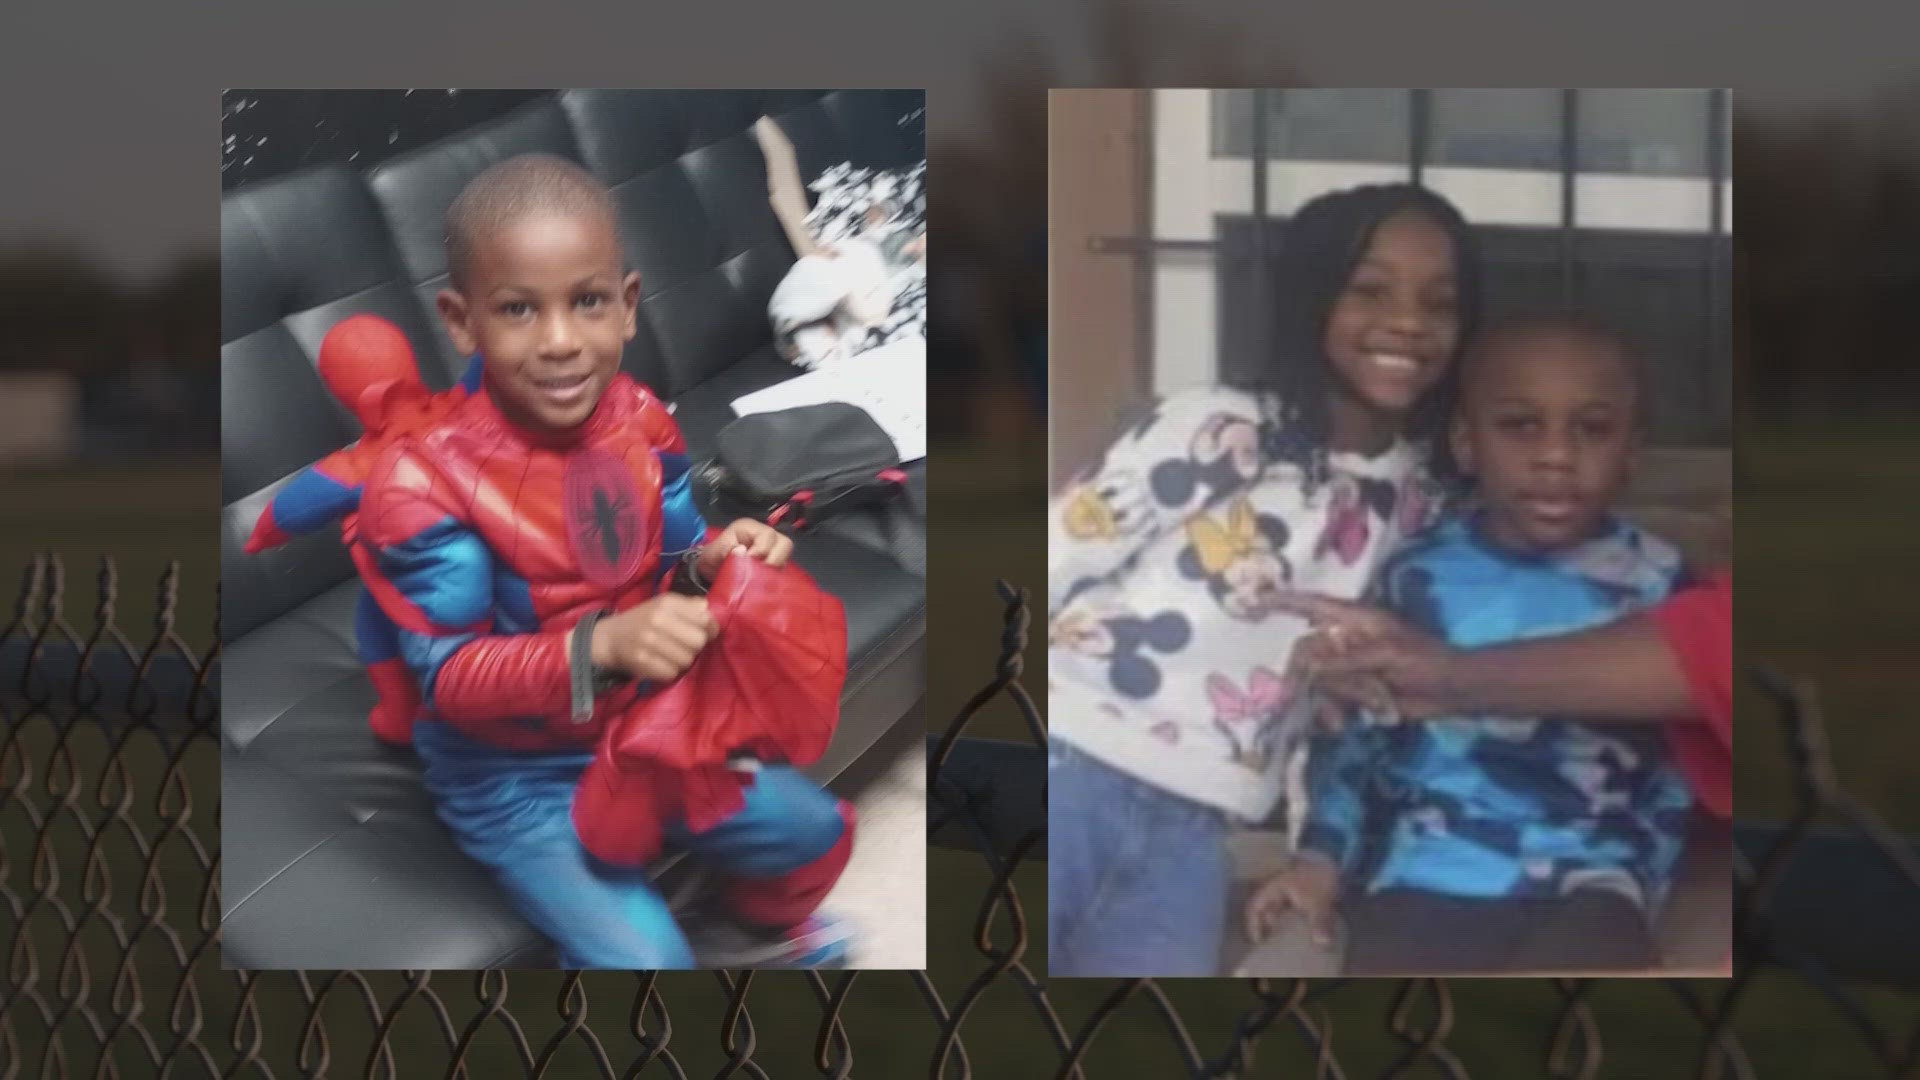 The paternal grandmother of 6-year-old Legend Chapell says he was one of the children killed in Italy, Texas. She told WFAA she tried to gain custody of him.